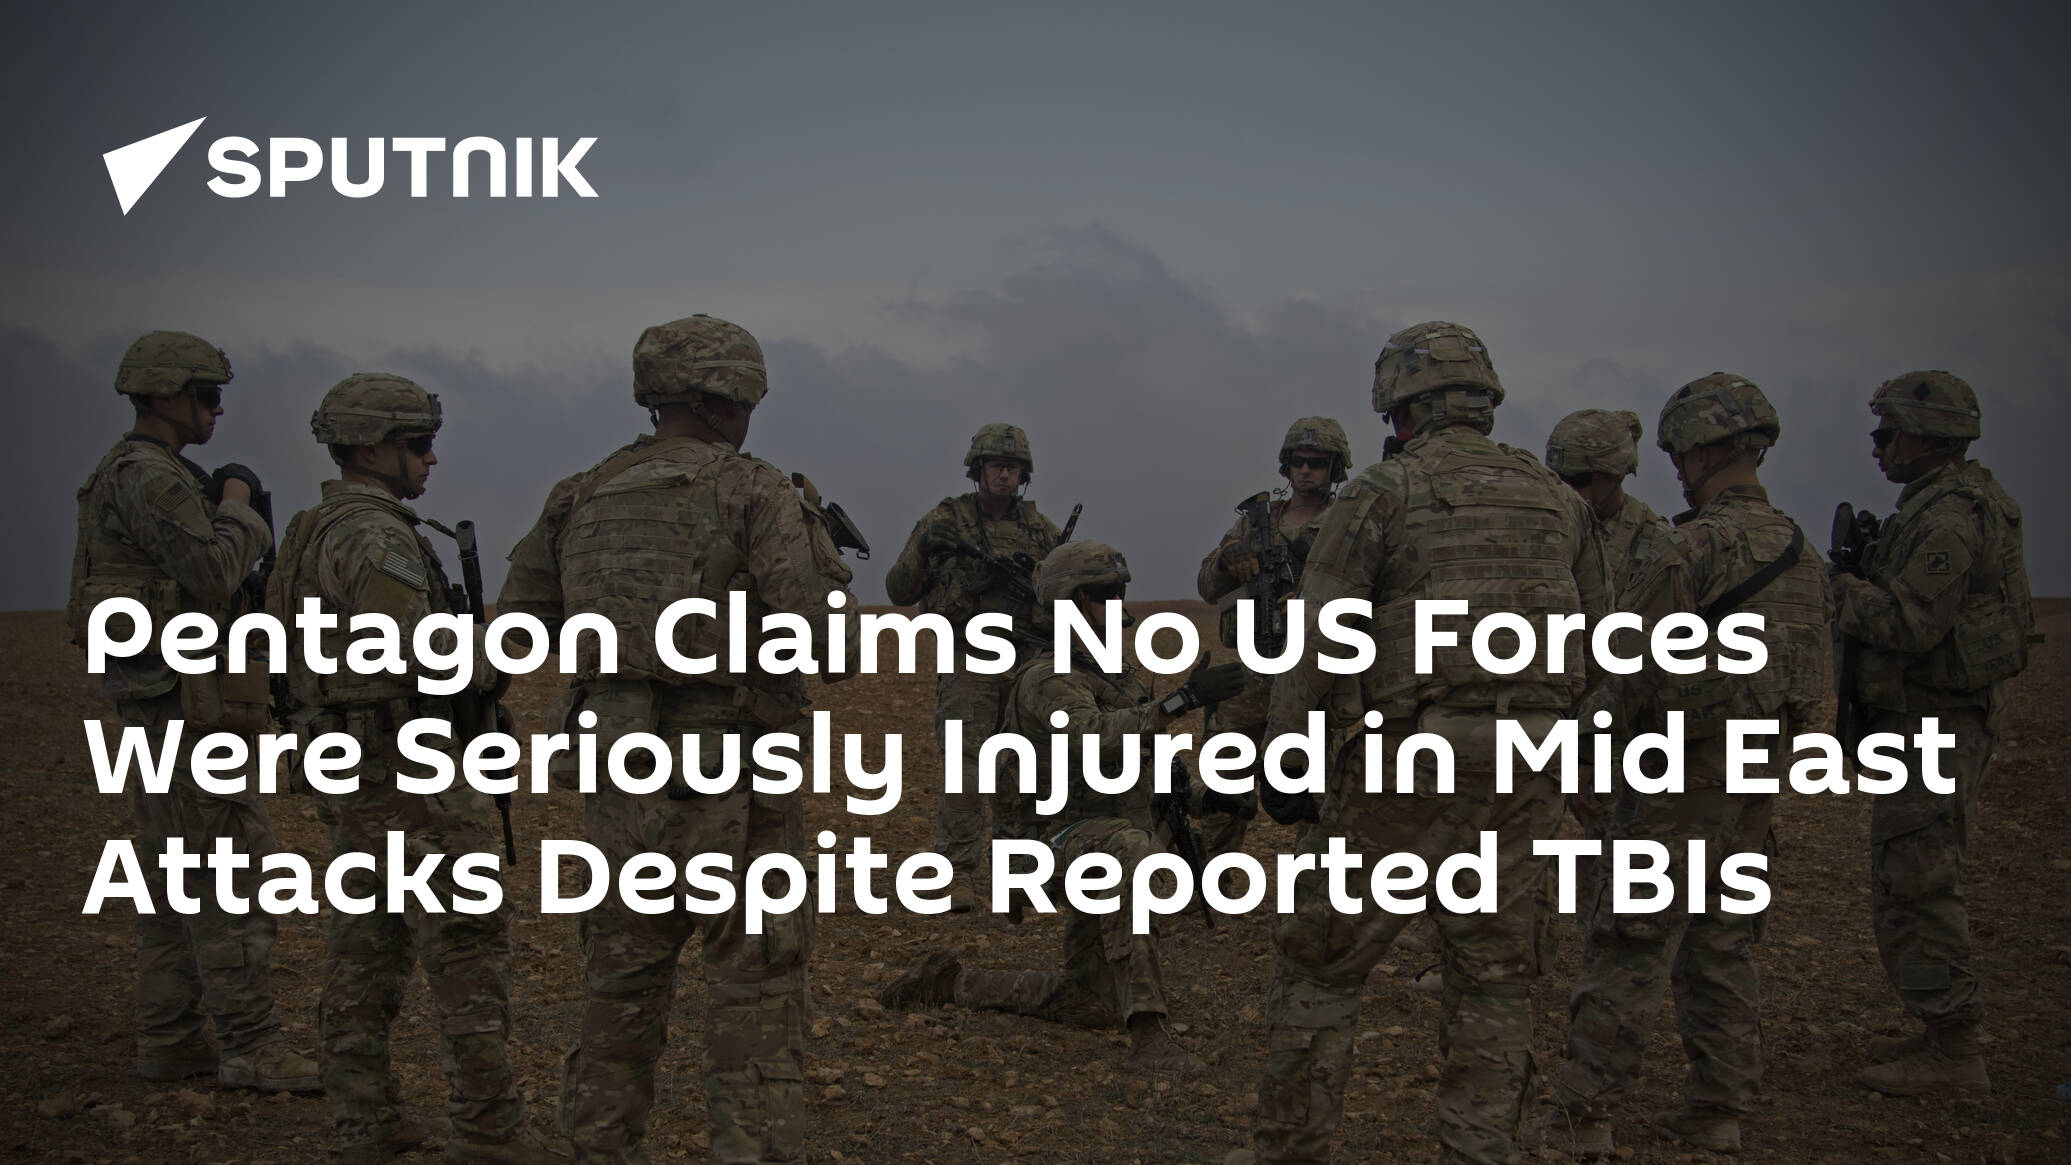 Pentagon Claims No US Forces Were Seriously Injured in Mid East Attacks Despite Reported TBIs